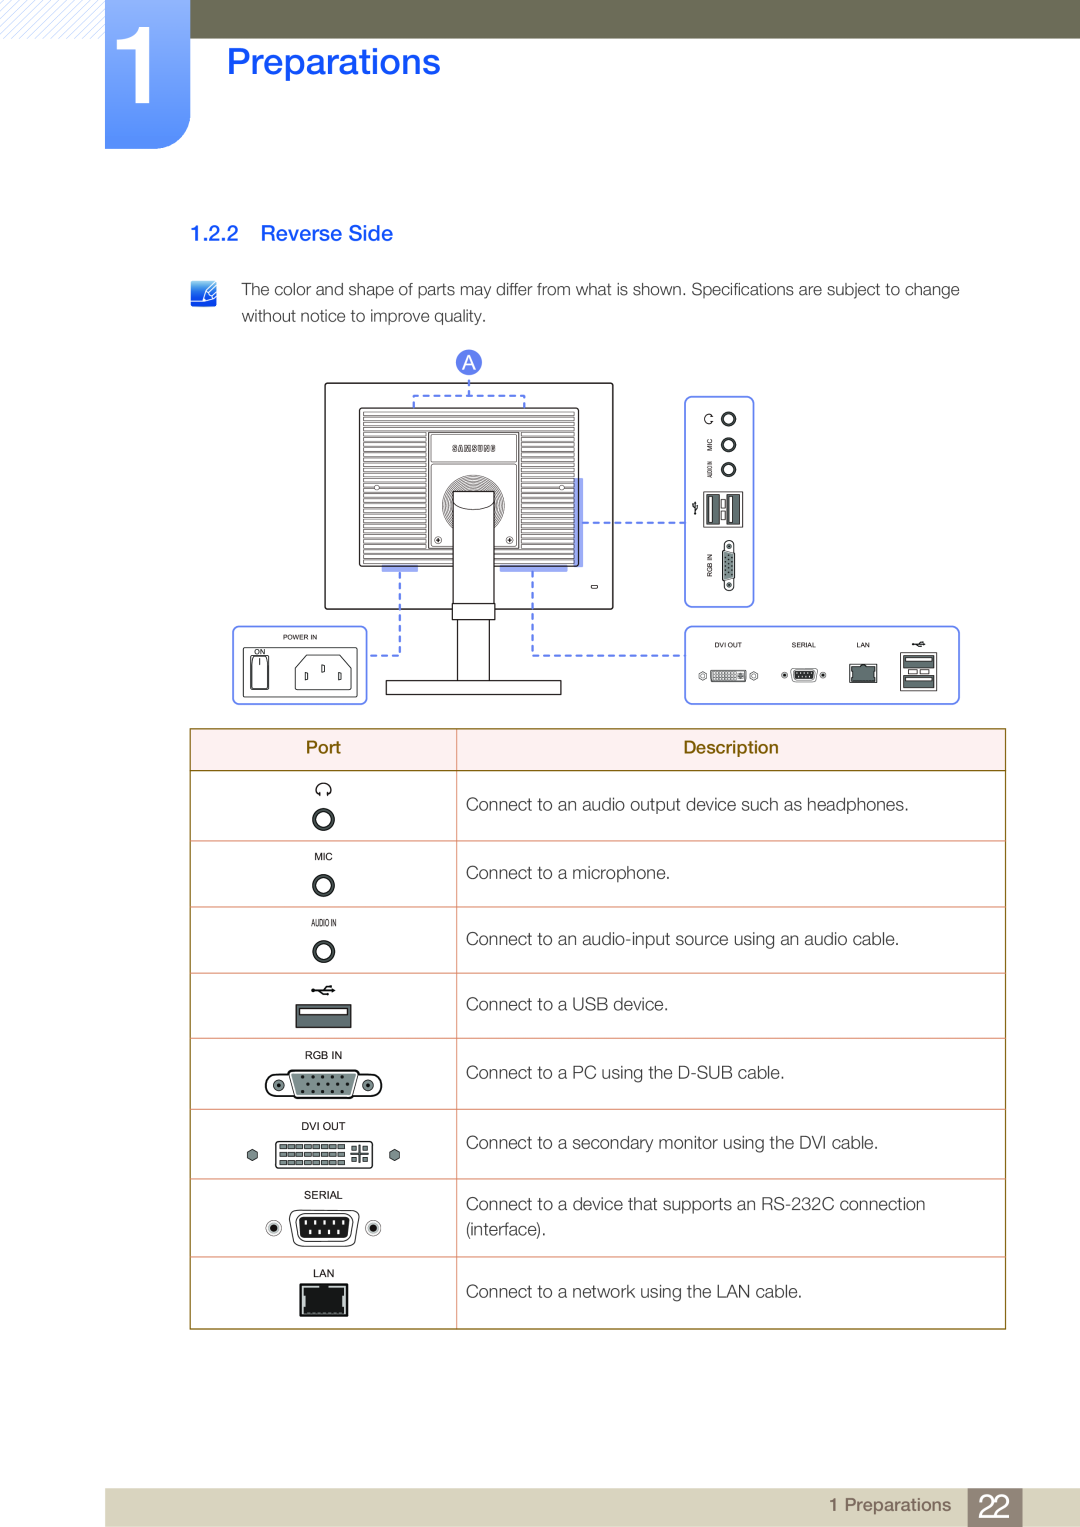 Samsung NC190-T, NC191, NC241T user manual Reverse Side, Preparations, Rgb In, Dvi Out, Serial 